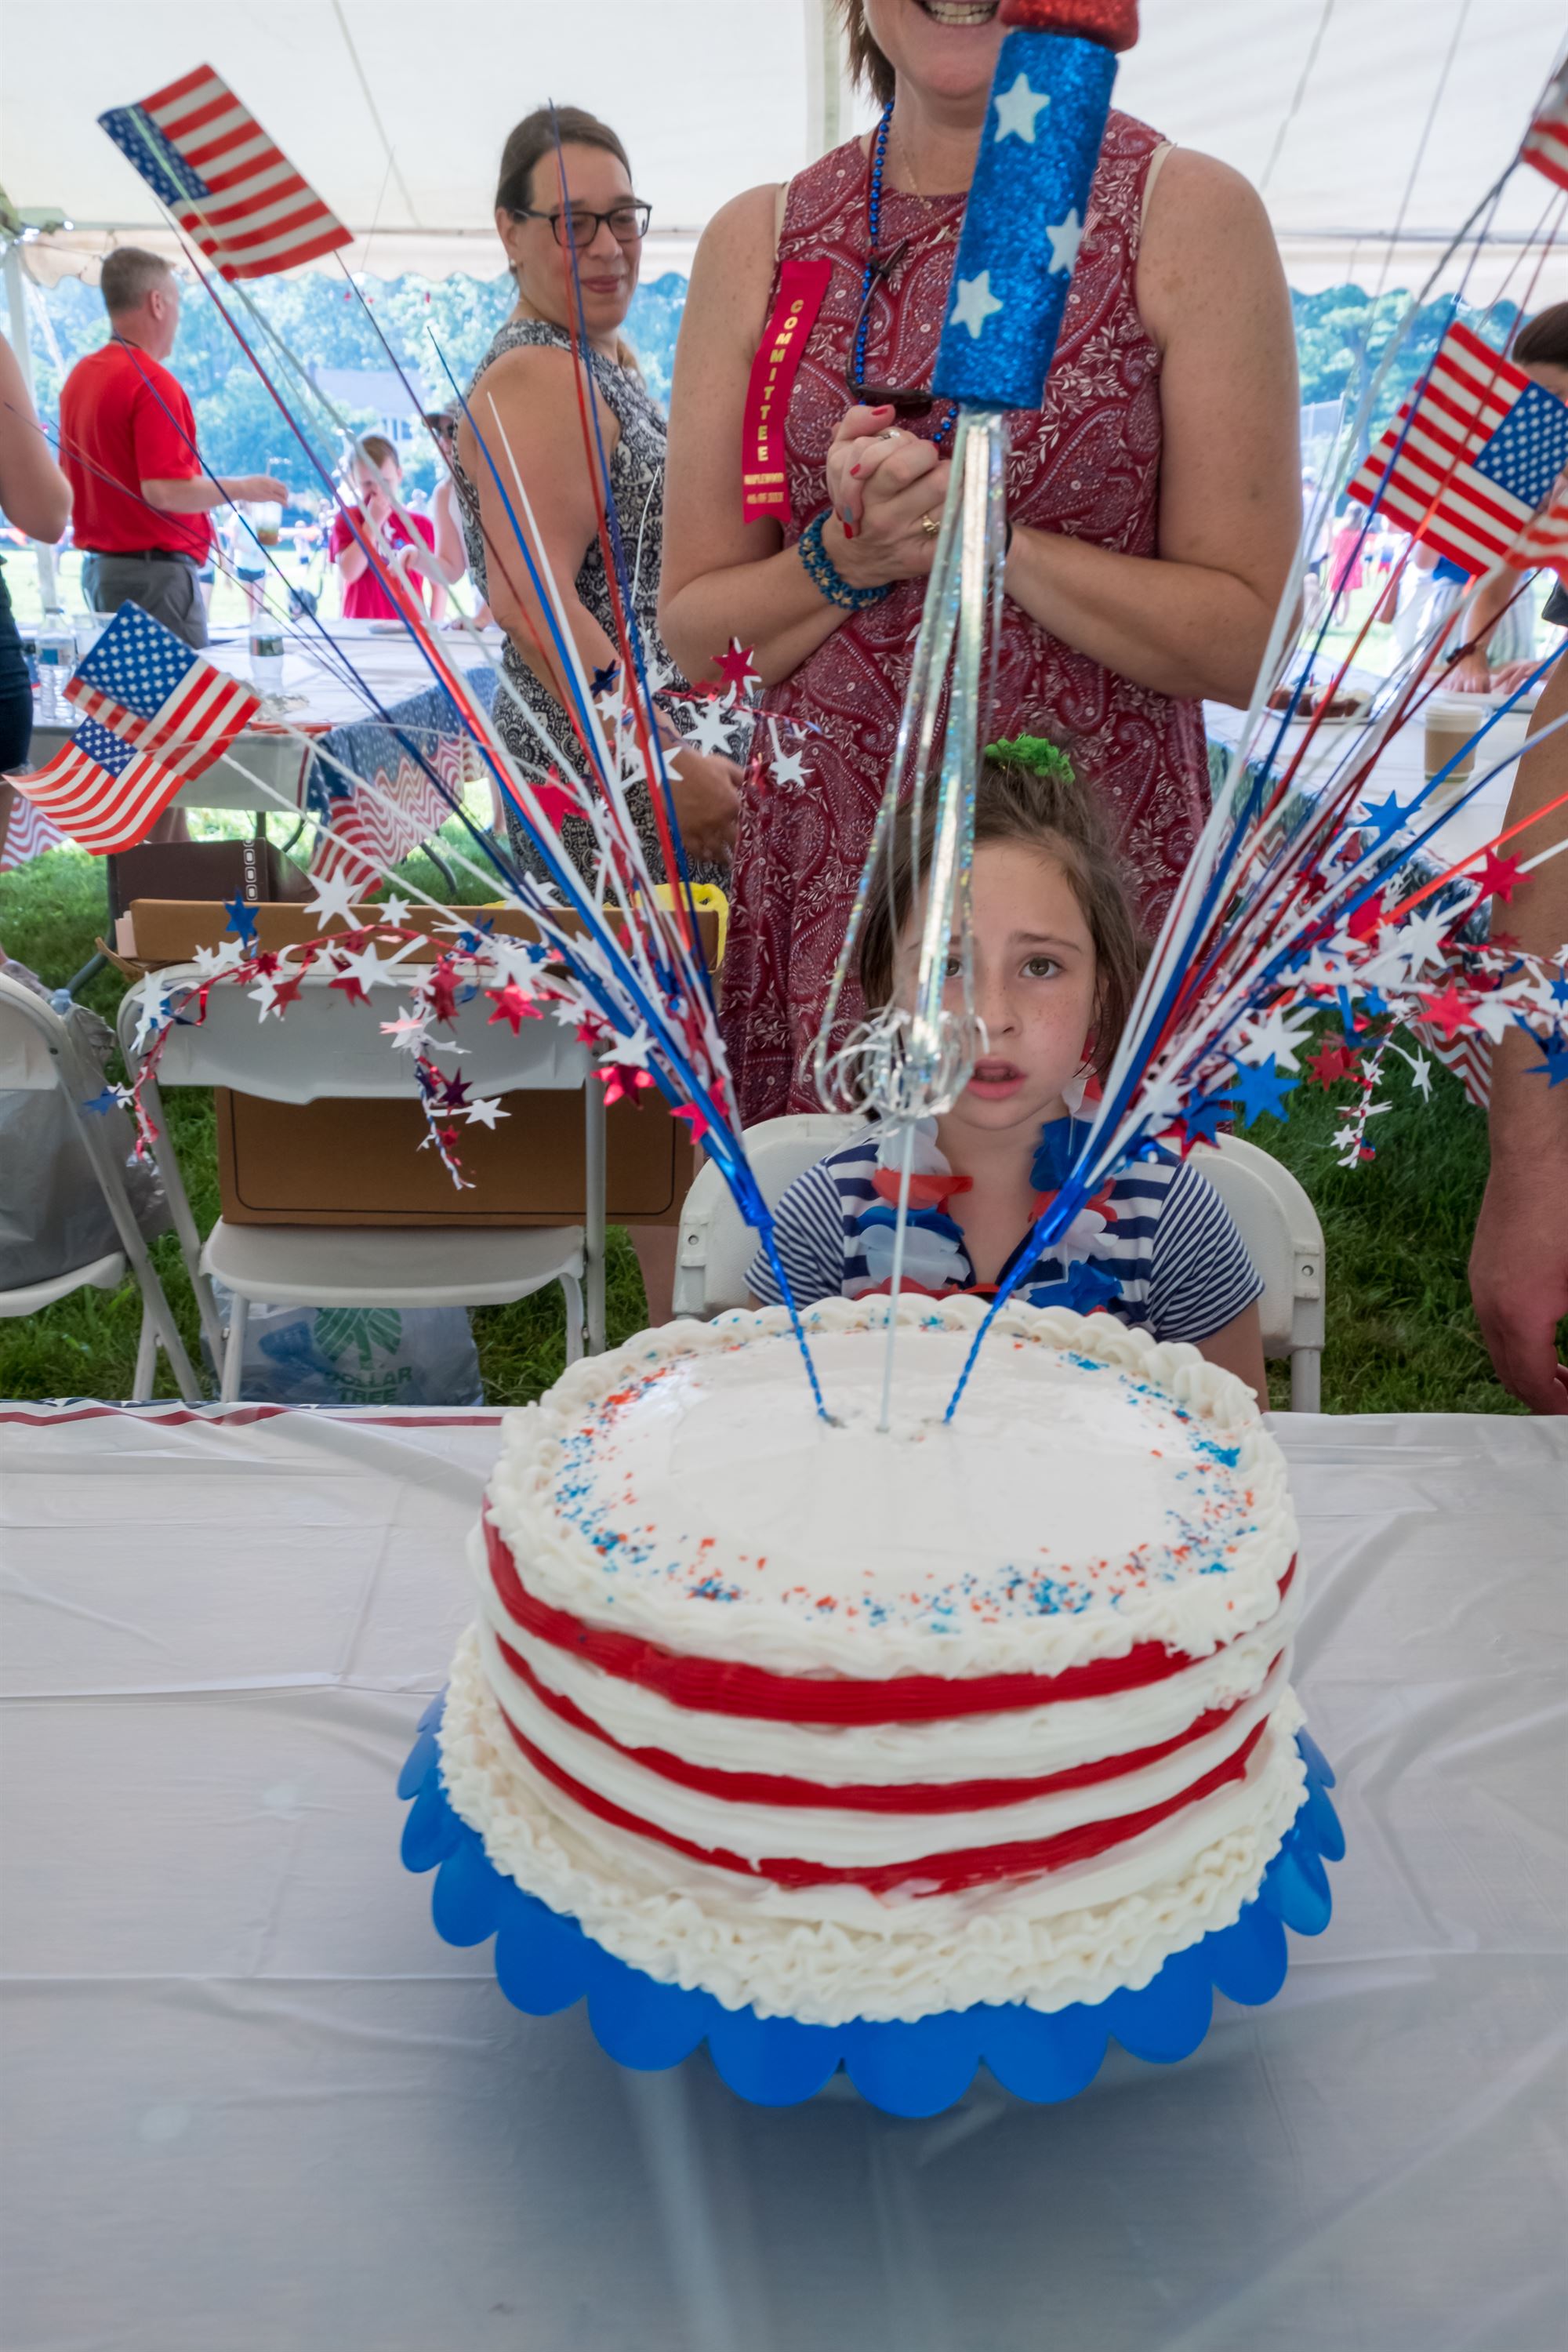 PHOTOS Maplewood's 4th of July Is Off to a Sweet Red, White & Blue